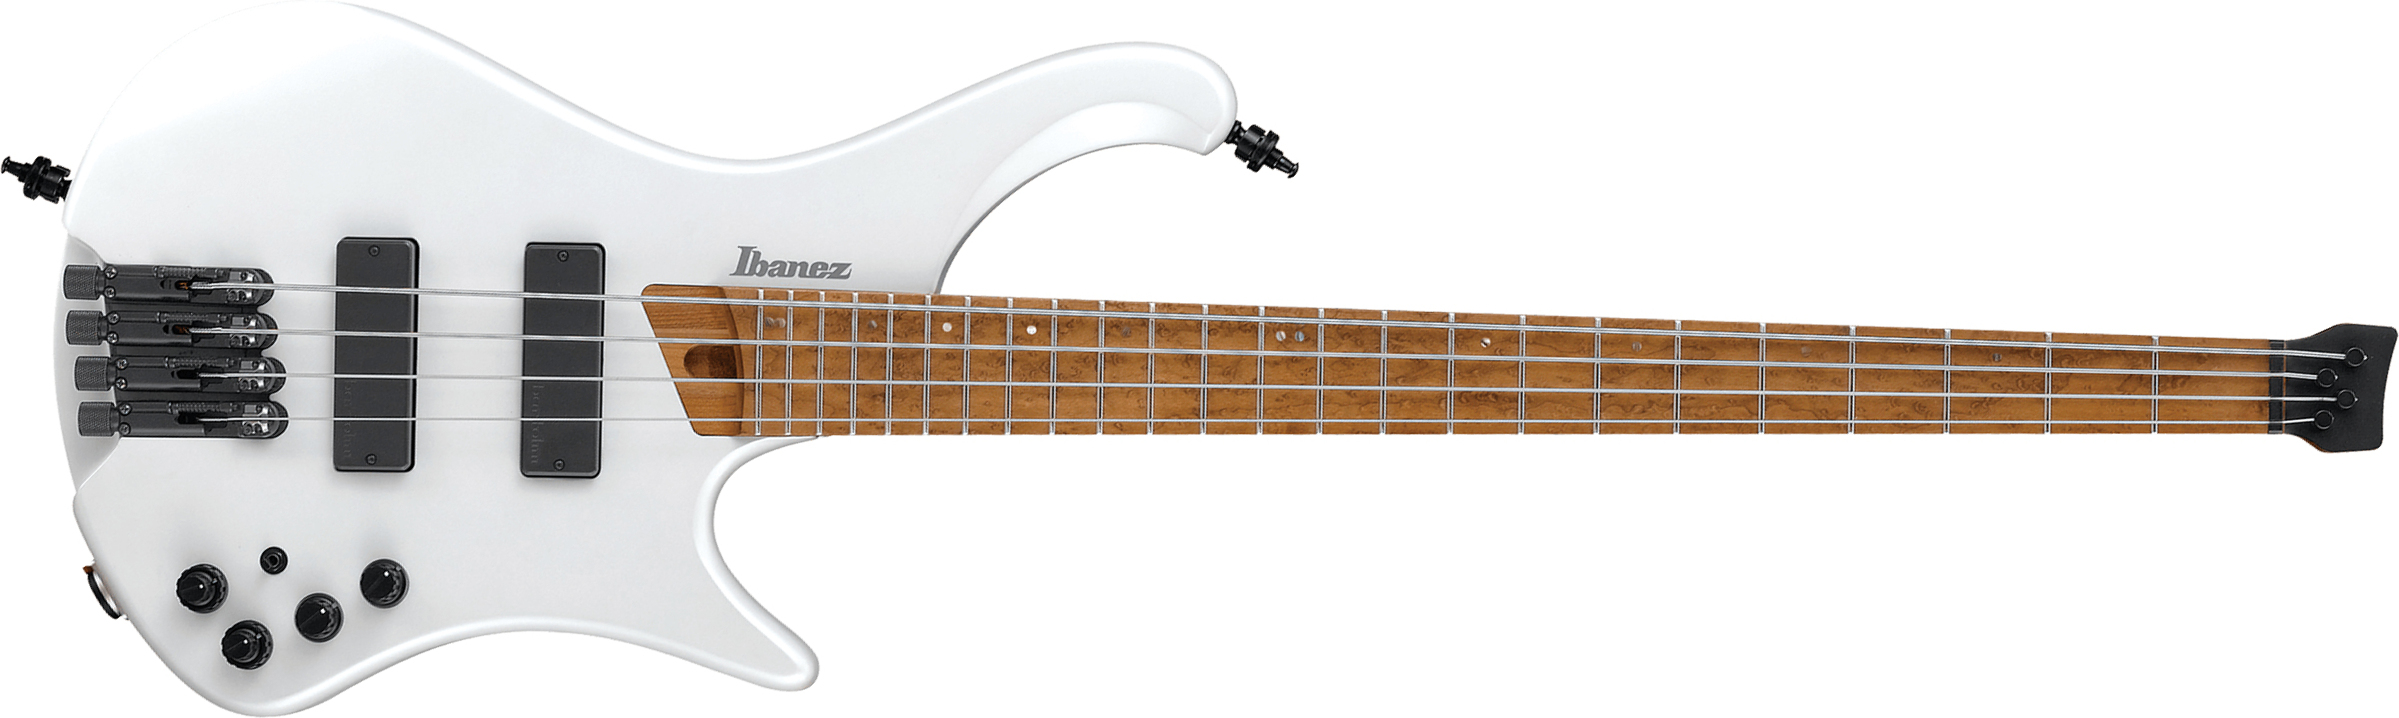 Ibanez Ehb1000 Pwm Workshop Active Bartolini Mn - Pearl White Matte - Solid body electric bass - Main picture